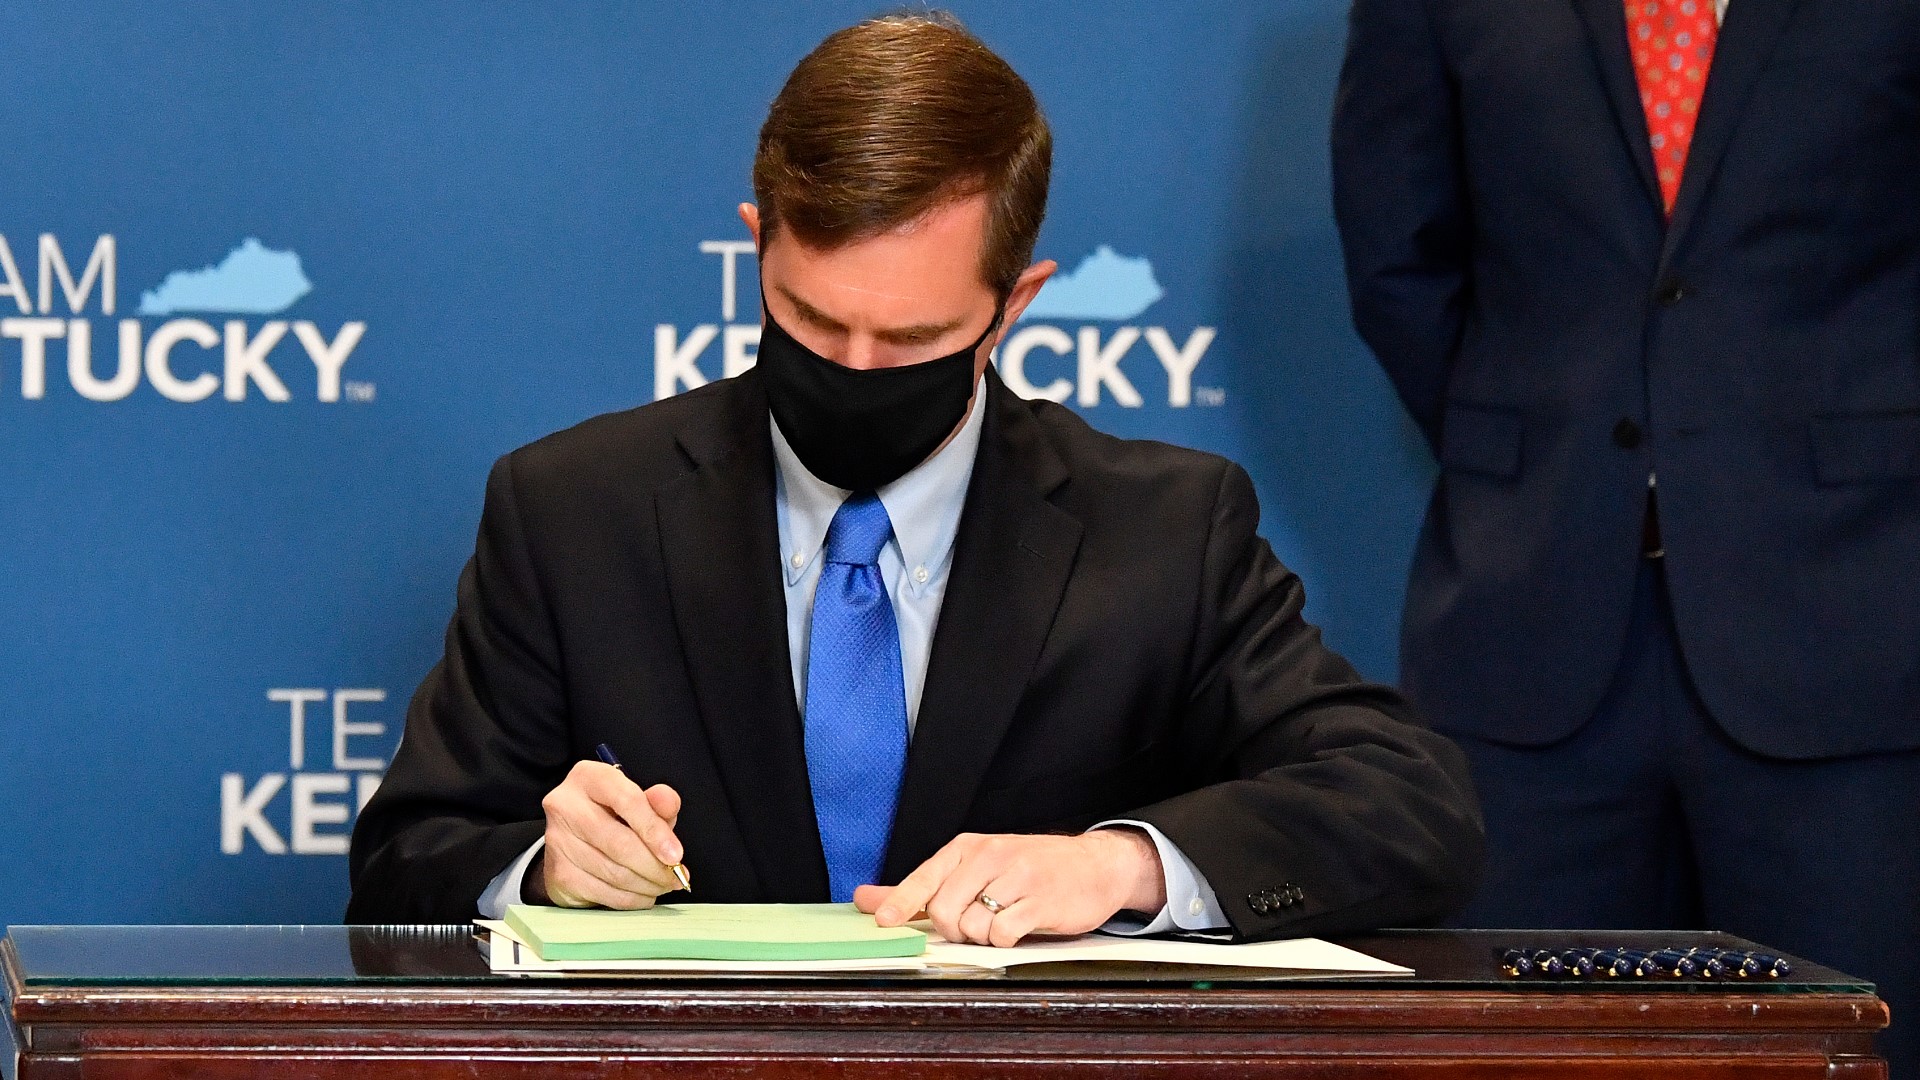 Beshear said the federal aid offers a “once-in-a-lifetime opportunity” for investments to attract businesses, create jobs and improve quality of life.